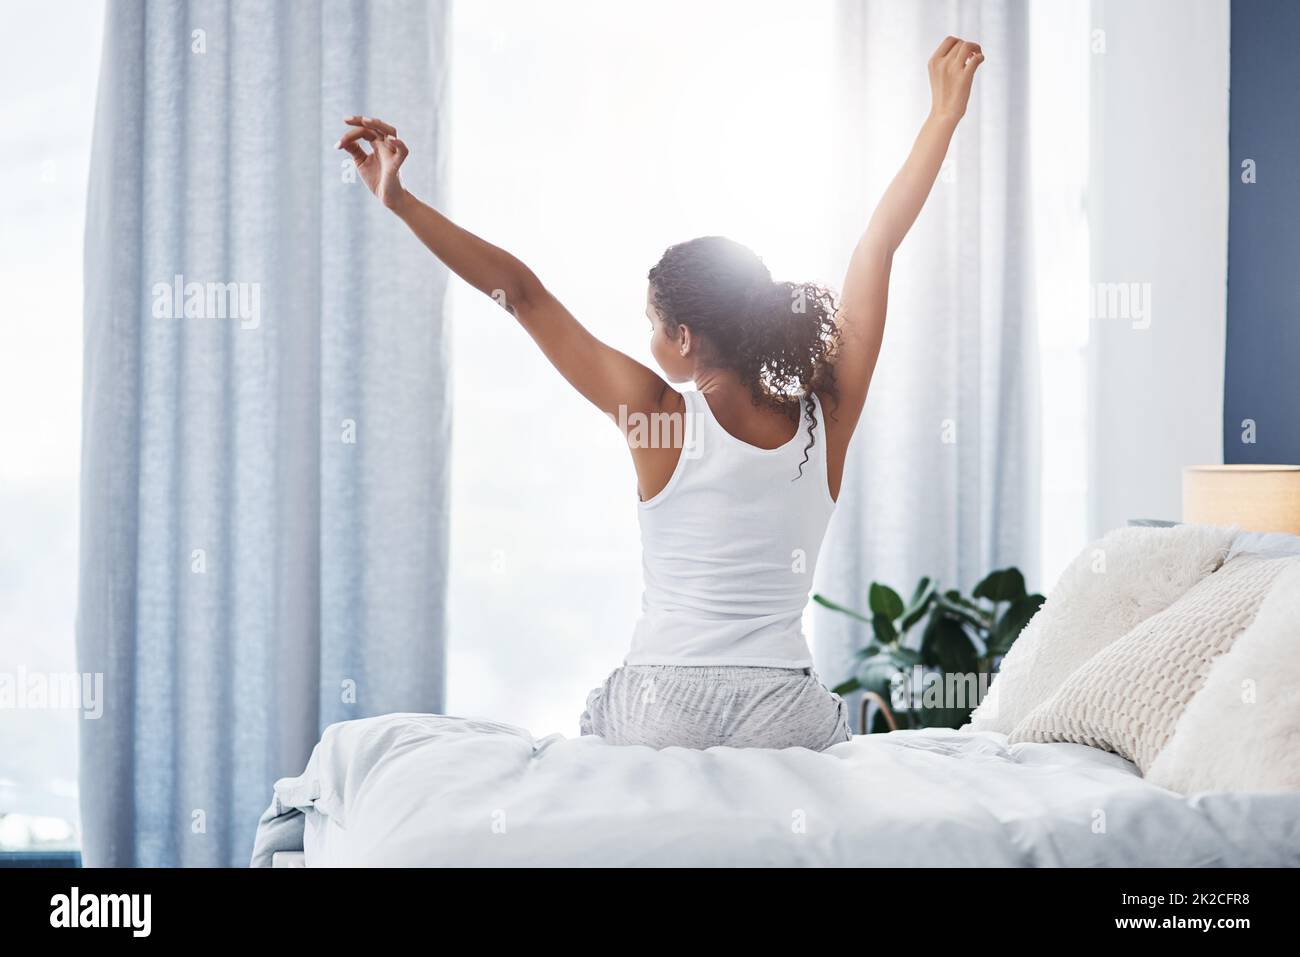 black woman in a bed with curtains mosquito net style boudoir Stock Photo -  Alamy